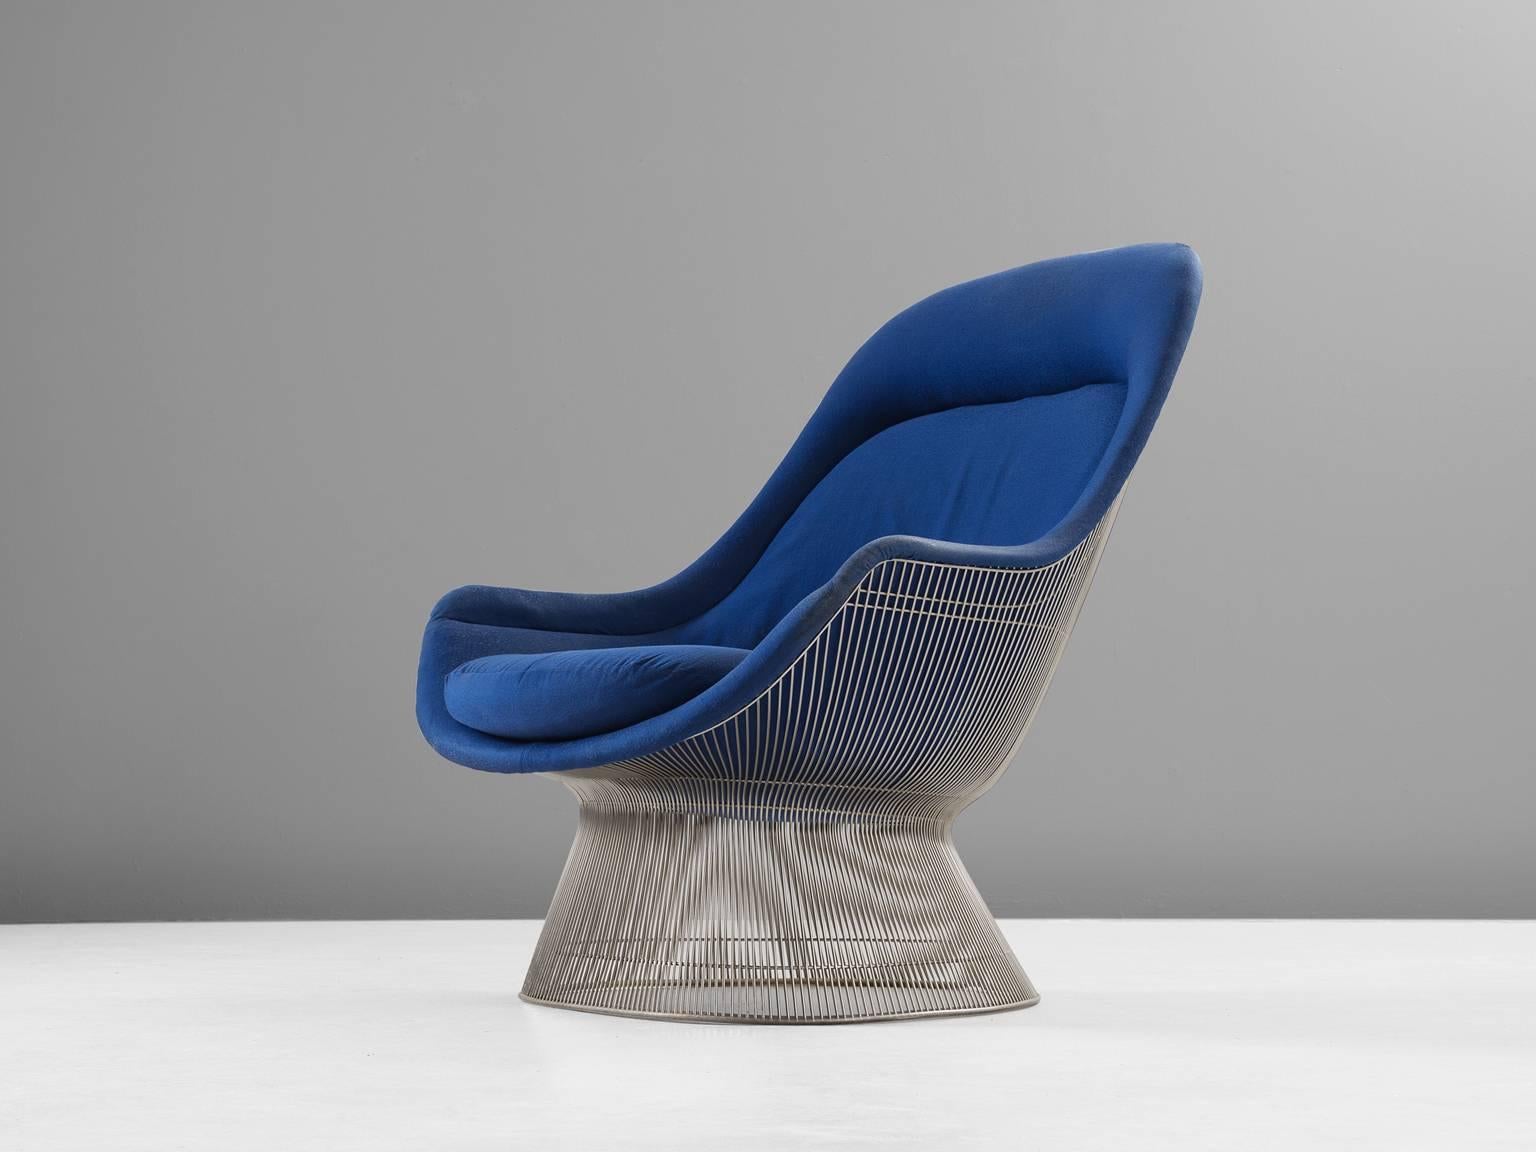 Warren Platner, lounge chair in metal and fabric, 1980s (design 1966), United States. 

This iconic blue easy chair by Warren Platner (1919-2006) is created by welding curved steel rods to circular and semi-circular frames, simultaneously serving